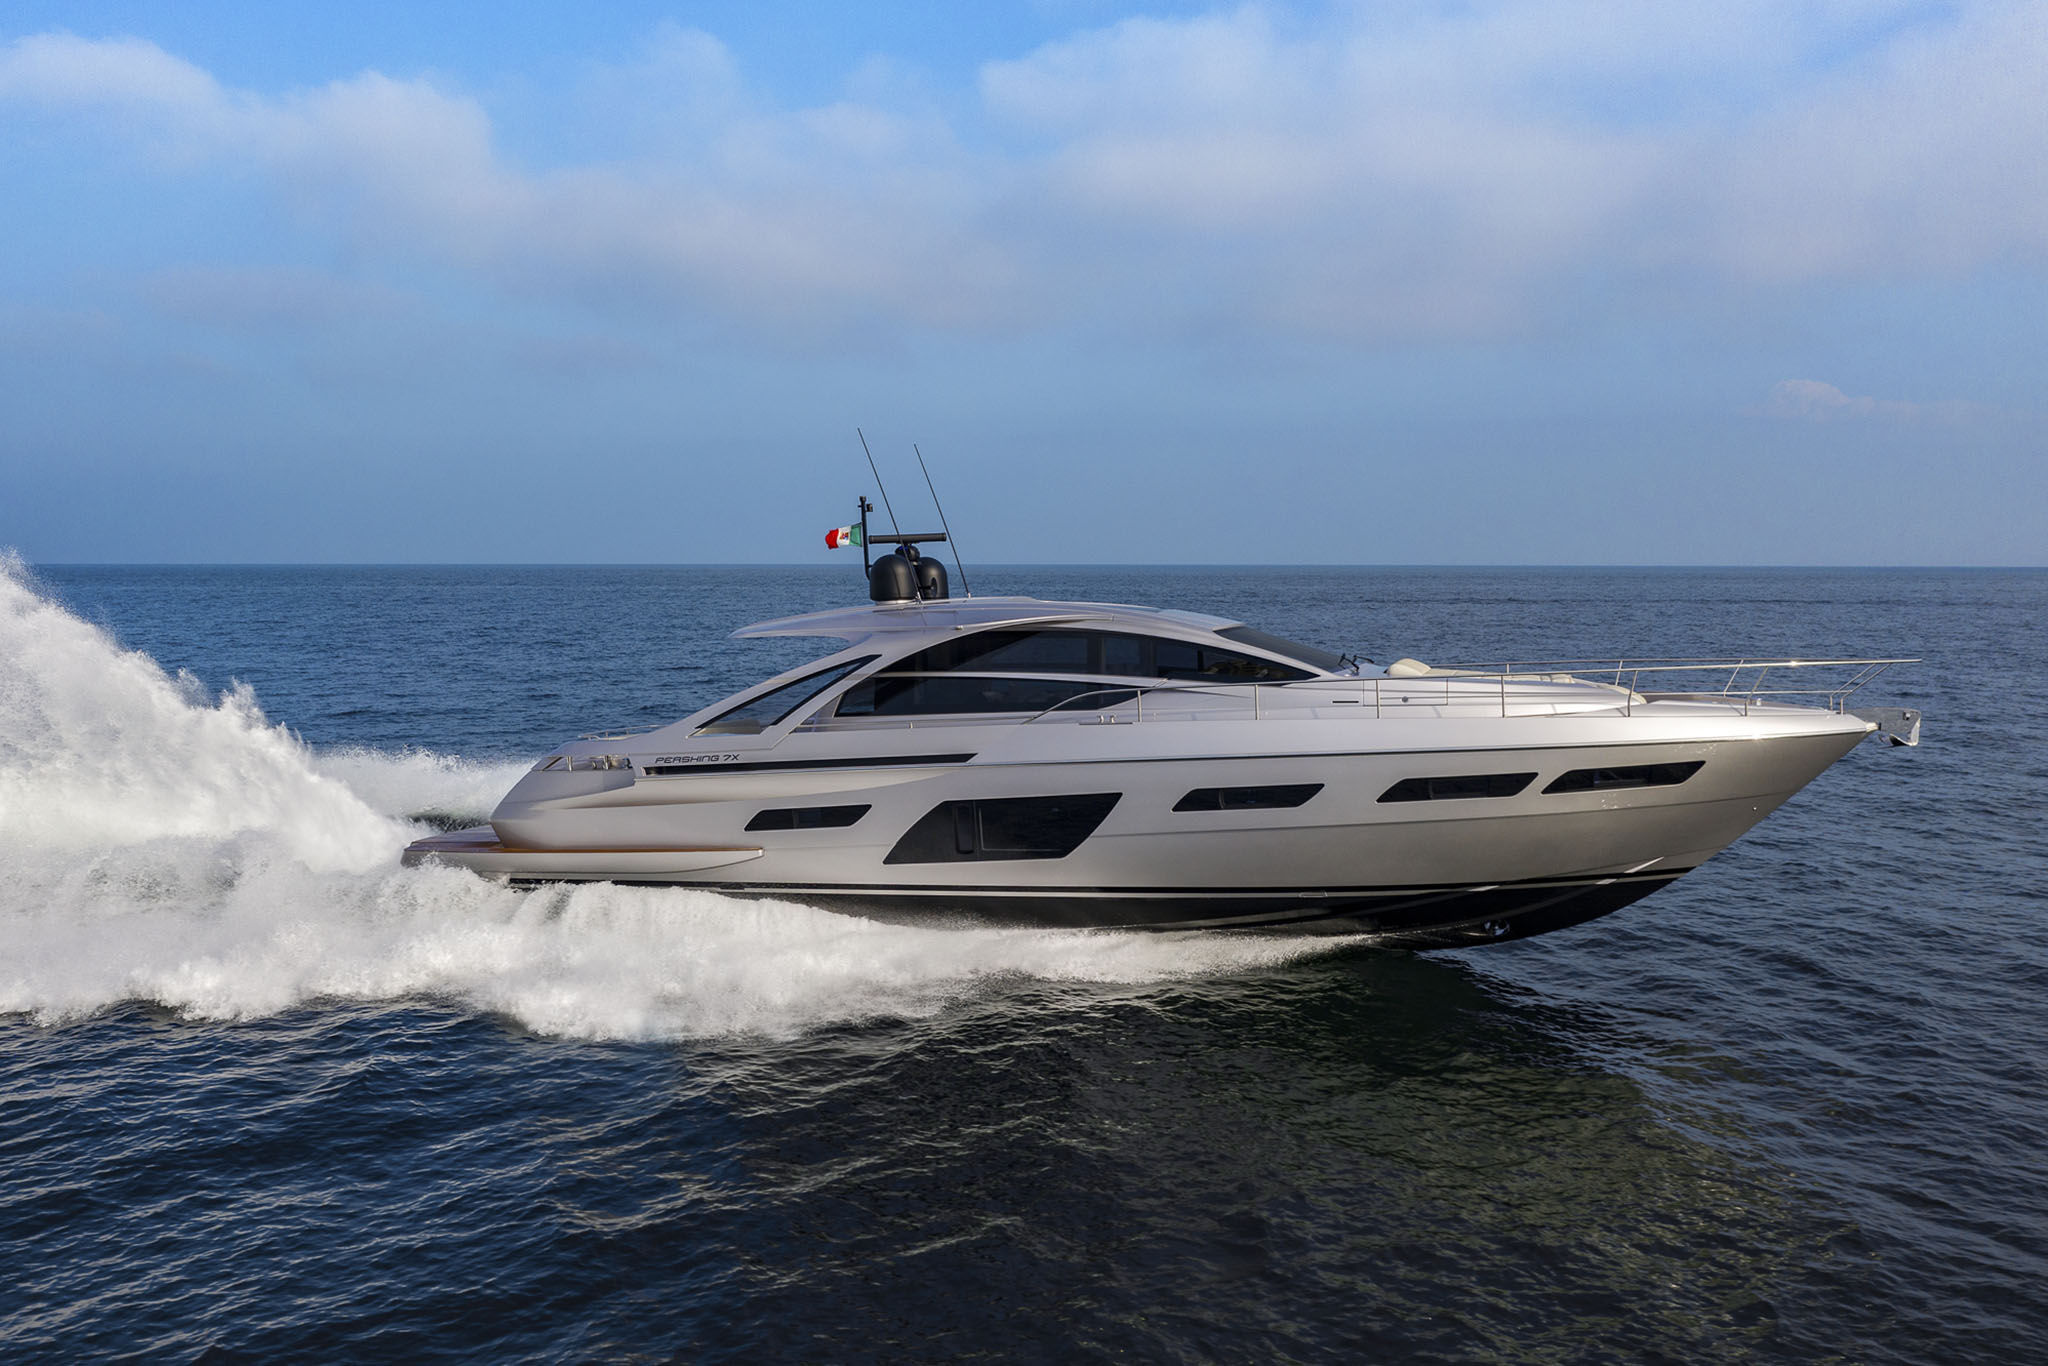 Pleasure Boat: Pershing 7X, Luxury speed motor yacht, Ship for entertainment. 2050x1370 HD Background.